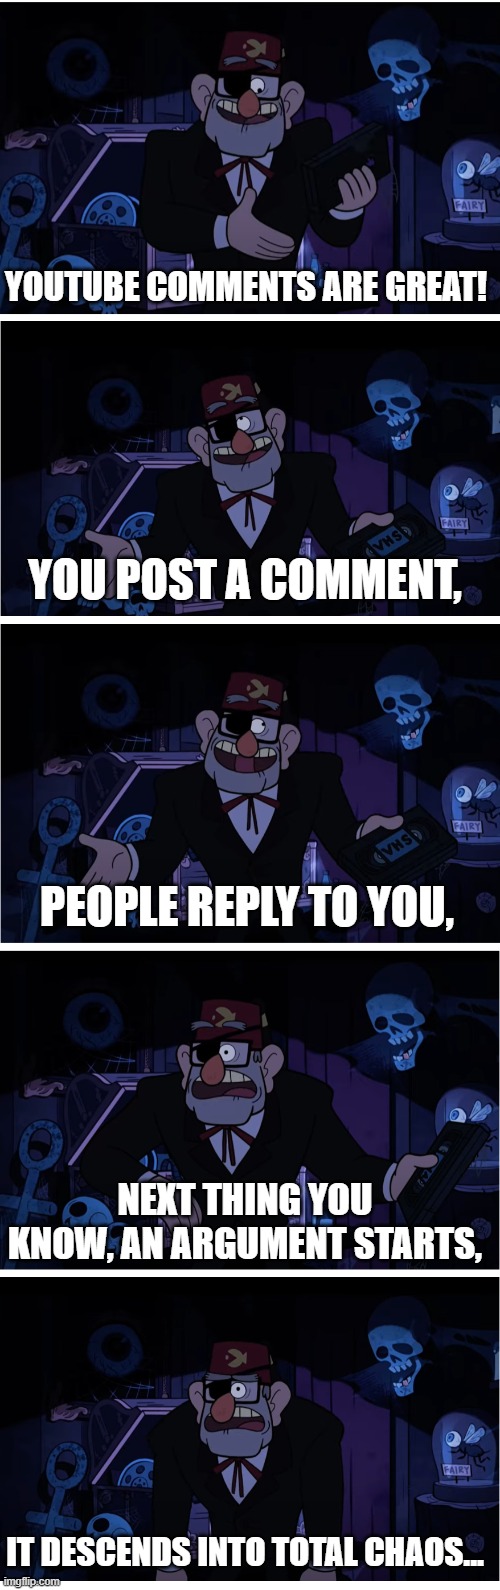 Ugh, Flame wars... |  YOUTUBE COMMENTS ARE GREAT! YOU POST A COMMENT, PEOPLE REPLY TO YOU, NEXT THING YOU KNOW, AN ARGUMENT STARTS, IT DESCENDS INTO TOTAL CHAOS... | image tagged in grunkle stan describes,gravity falls,youtube,youtube comments,gravity falls meme,internet | made w/ Imgflip meme maker